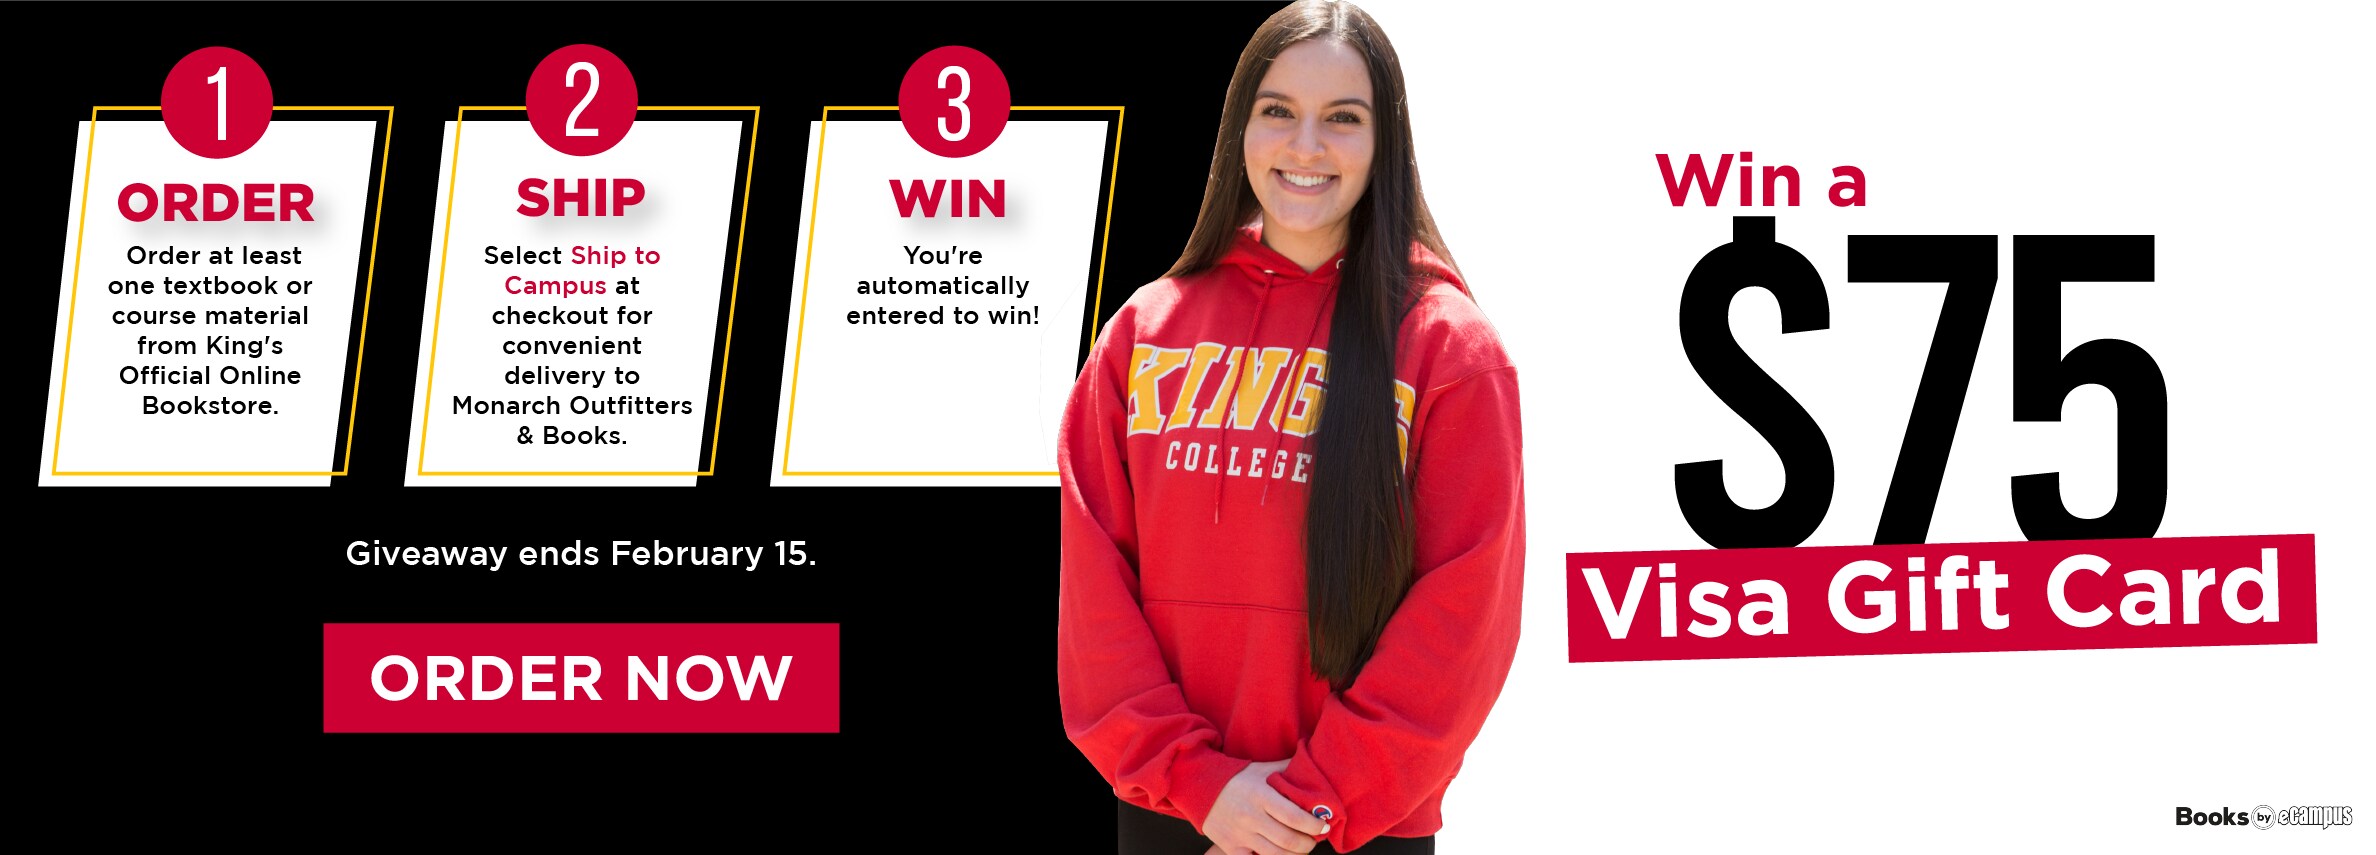 Win a $75 Visa Gift Card. 1 Order at least one textbook or course material from King's Official Online Bookstore. 2 SHIP Select Ship to Campus at checkout for convenient delivery to Monarch Outfitters & Books. 3 WIN You're automatically entered to win! Giveaway ends February 15. ORDER NOW